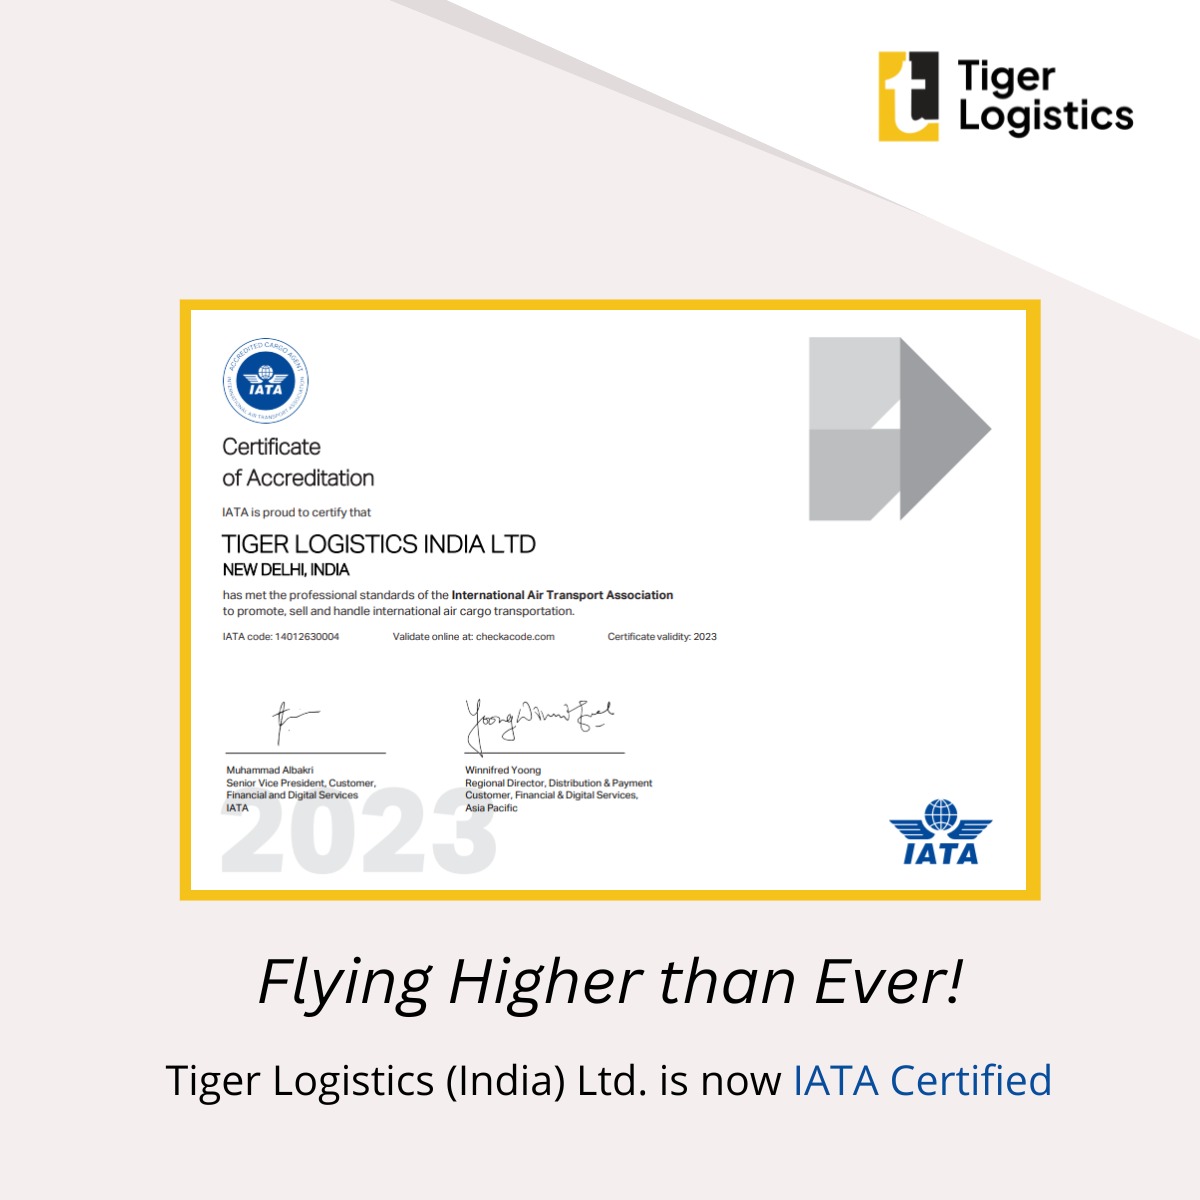 We are delighted to announce that Tiger Logistics has been granted a Certificate of Accreditation💻 from the International Air Transport Association (@IATA). 

#TigerLogistics #freightforwarding #freightforwarder #logisticsssolution #Freightbooking #Freightmanagement